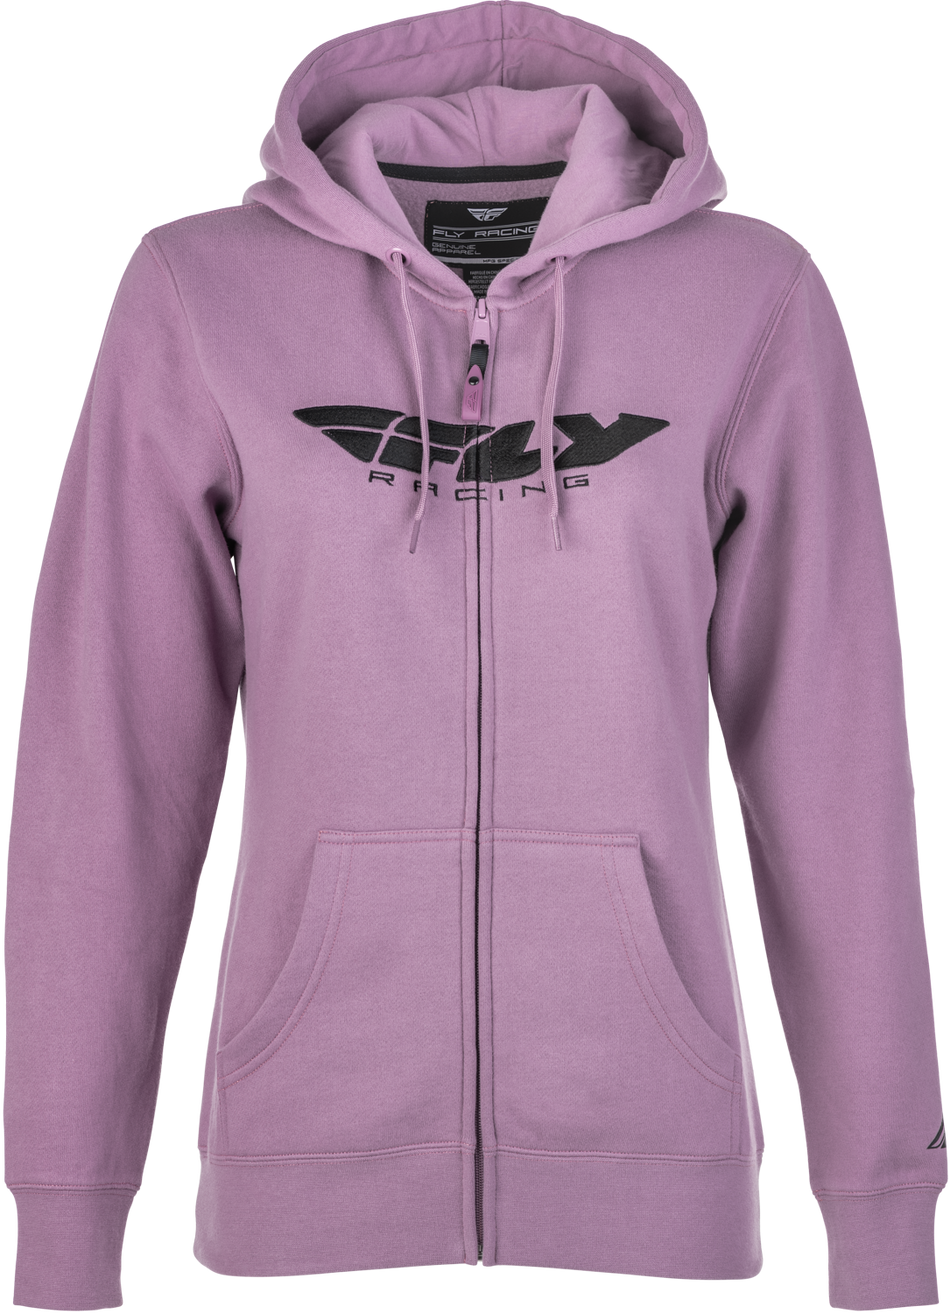 FLY RACING Women's Fly Corporate Zip Up Hoodie Mauve Md 358-0062M